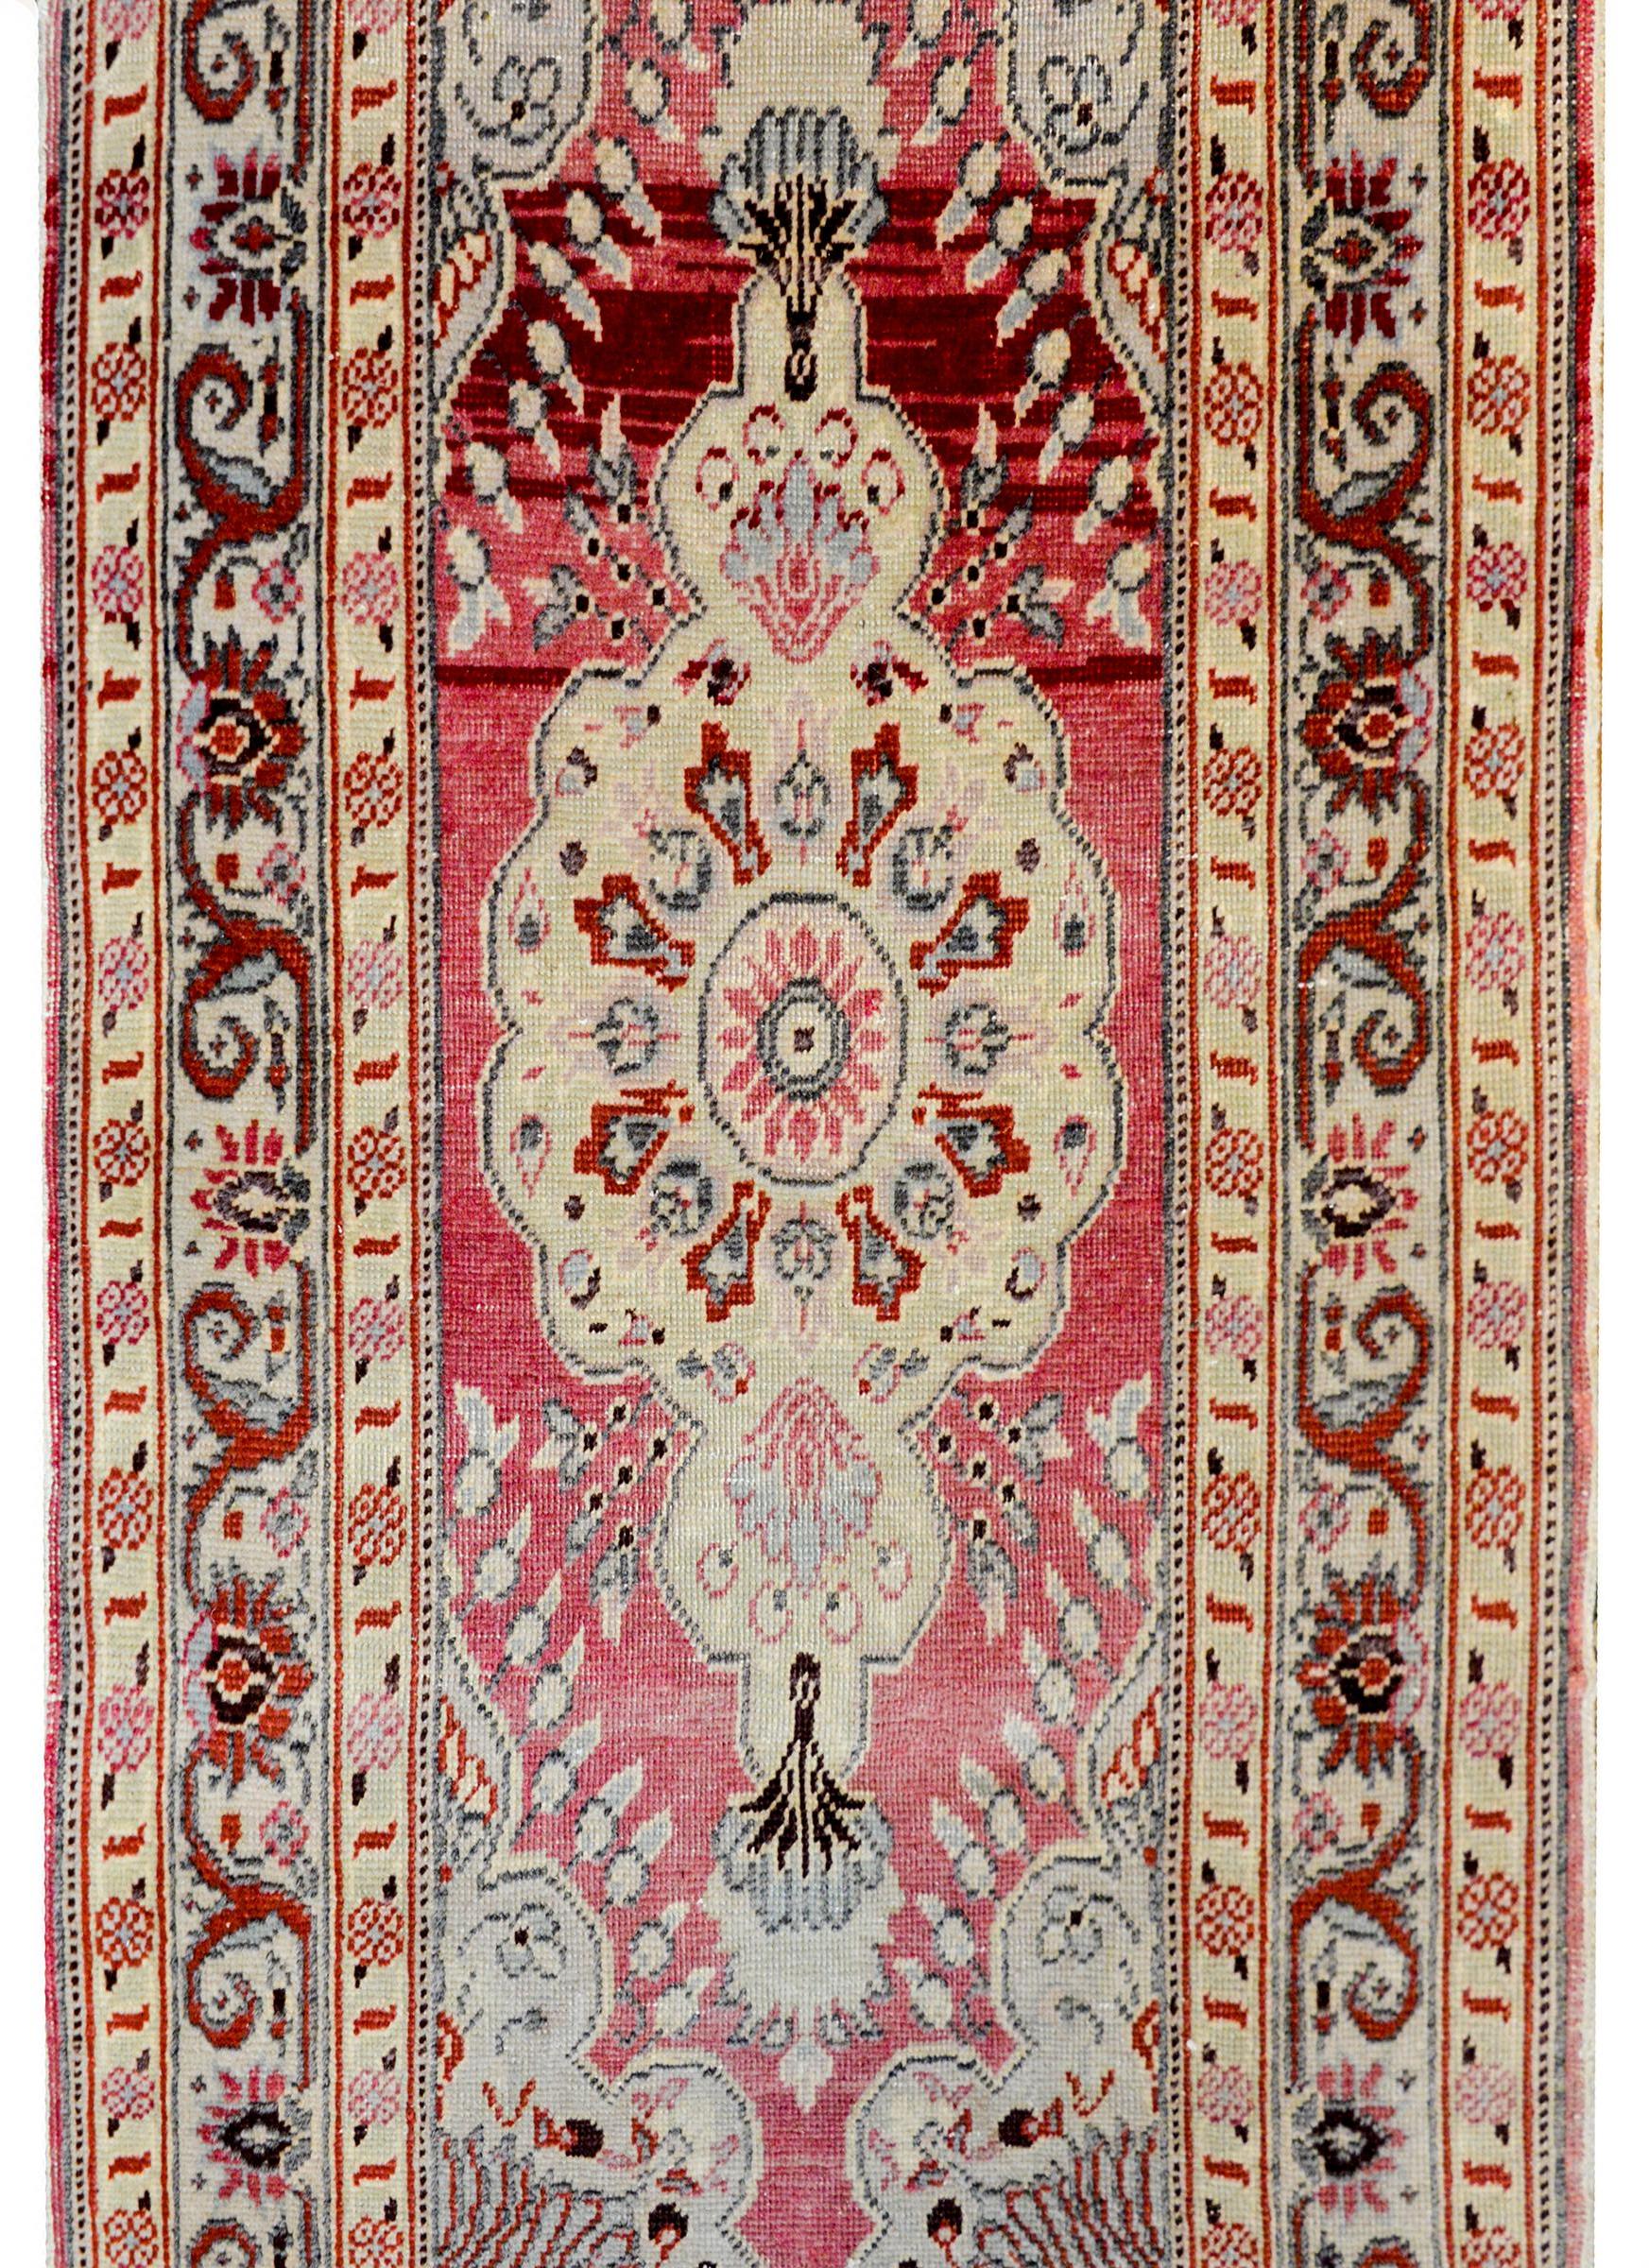 A beautiful early 20th century Persists Tabriz rug with a large central diamond medallion on a bold abrash cranberry background surrounded by a complex border containing a floral and scrolling vine pattern flanked by a pair of petite floral